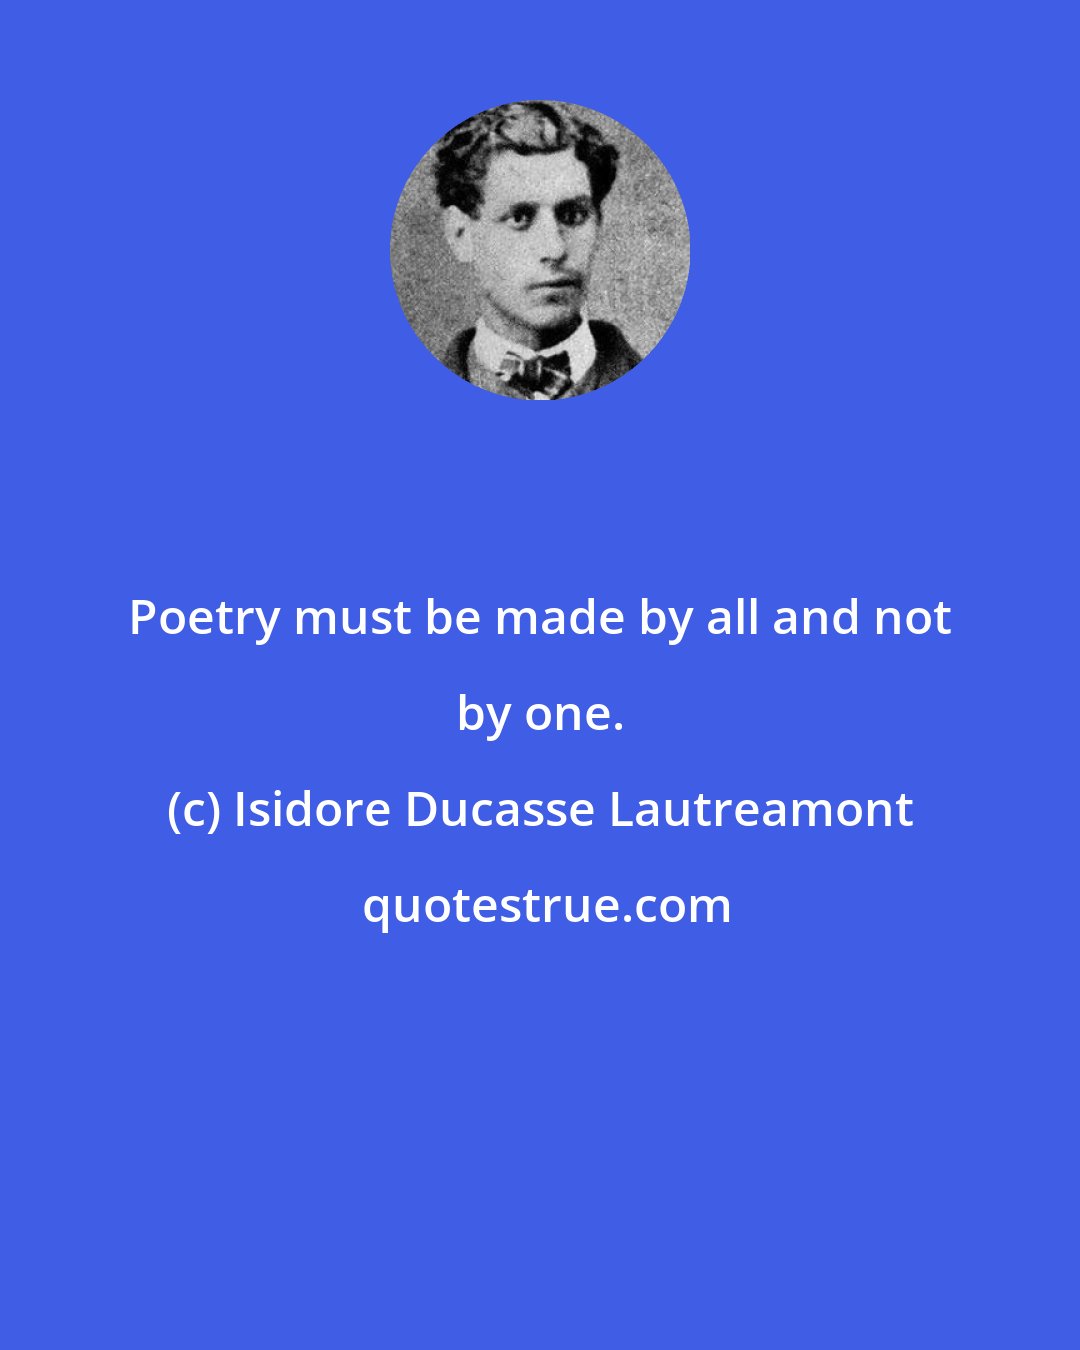 Isidore Ducasse Lautreamont: Poetry must be made by all and not by one.